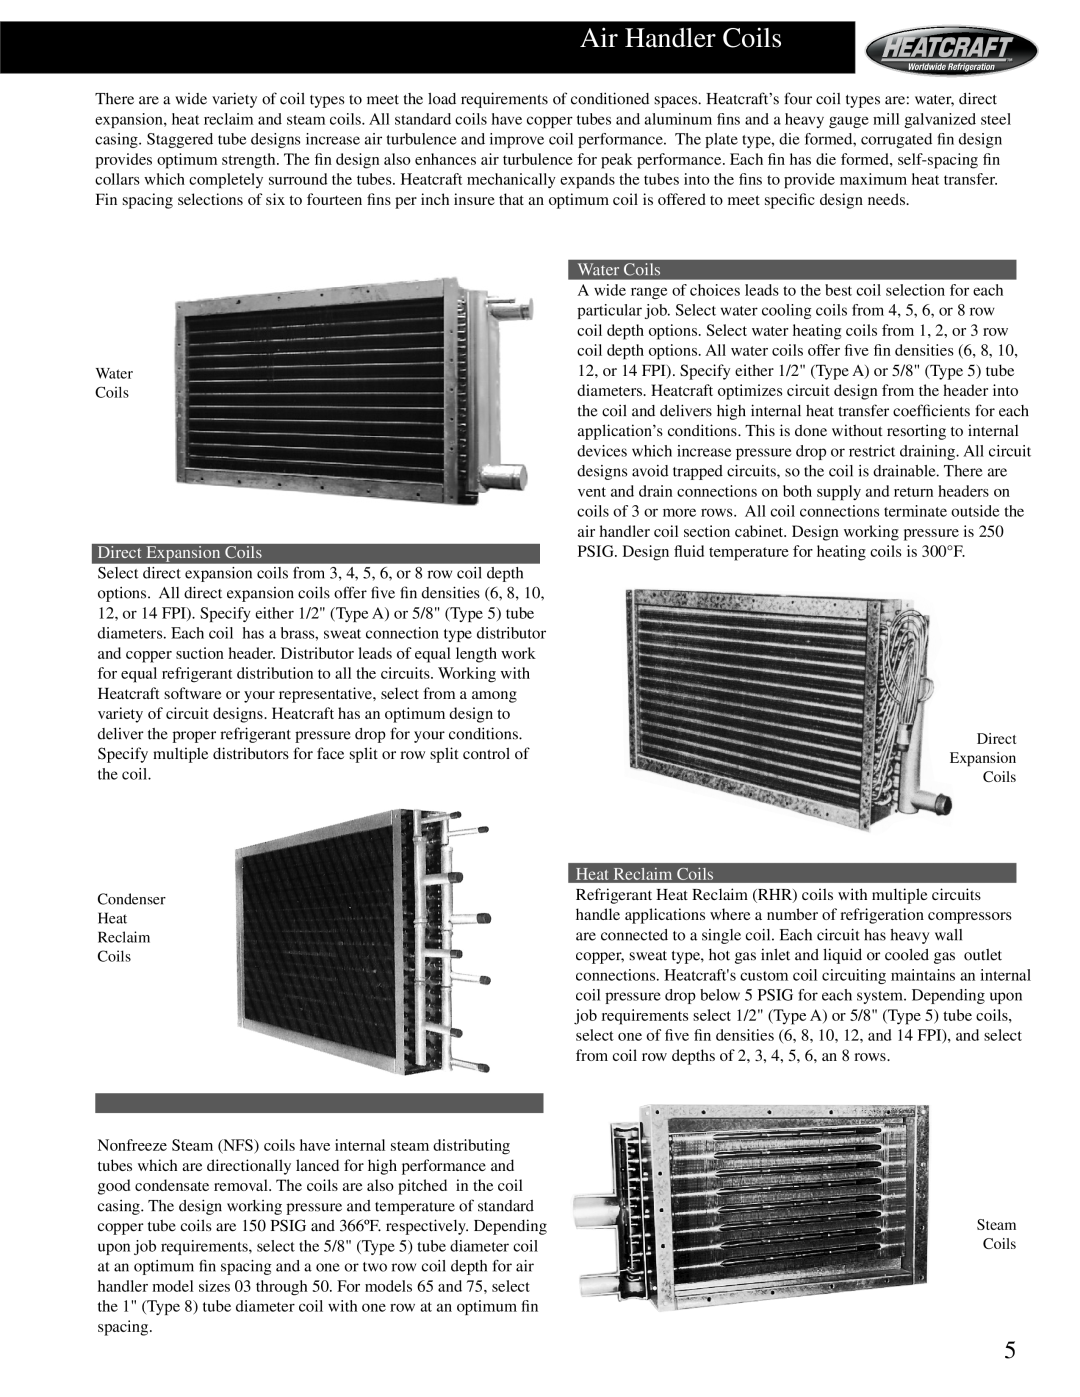 Heatcraft Refrigeration Products HCS manual Air Handler Coils, Direct Expansion Coils, Water Coils, Heat Reclaim Coils 